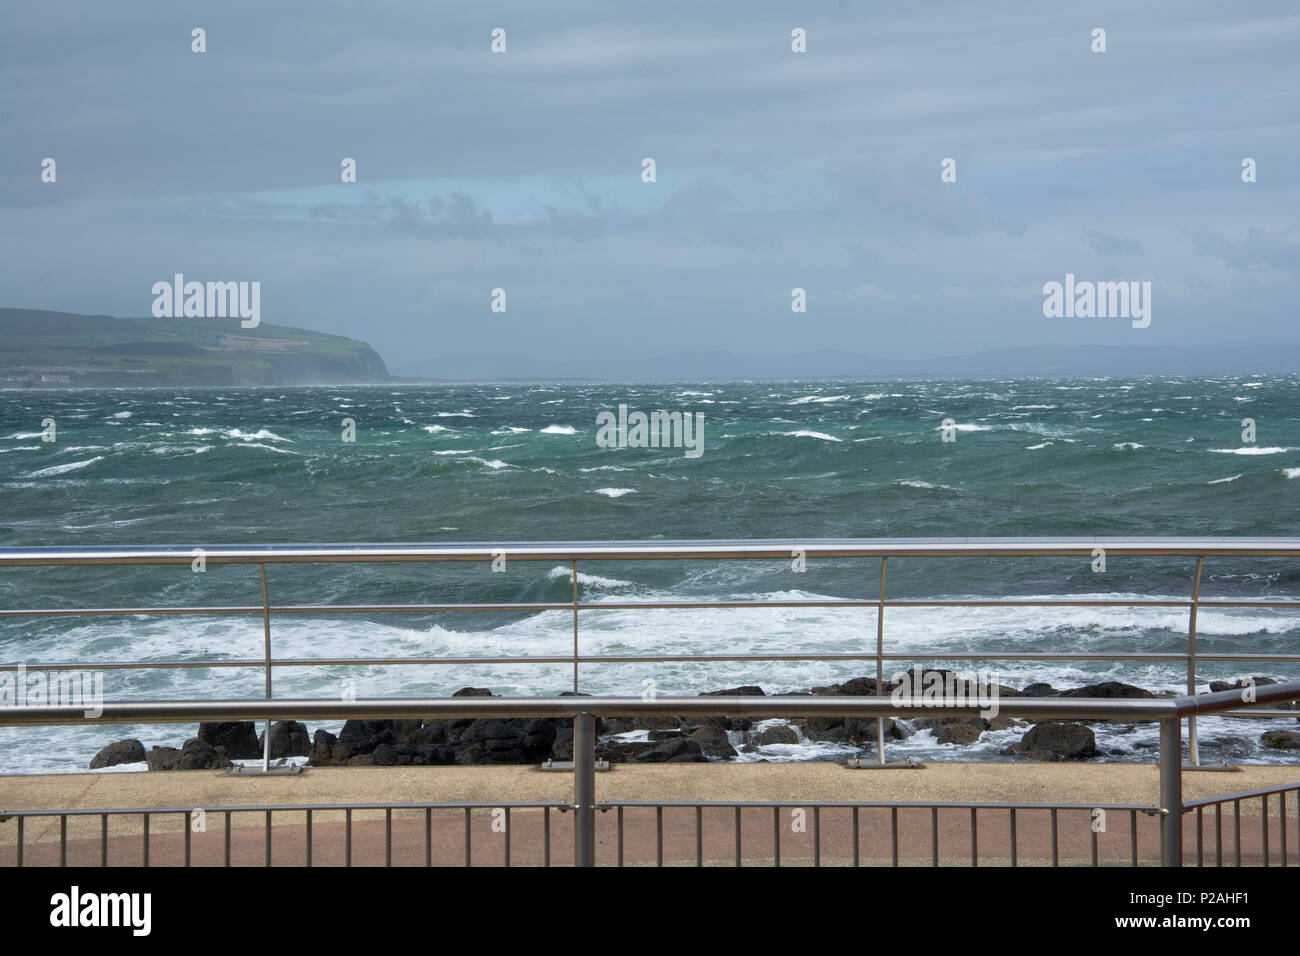 The Promenade, Portstewart,Northern Ireland. 14th June 2018. Storm “Hector” passes through the North Coast of Northern Ireland causing rough seas but not as much damage as predicted. Credit: Brian Wilkinson/Alamy Live News Stock Photo